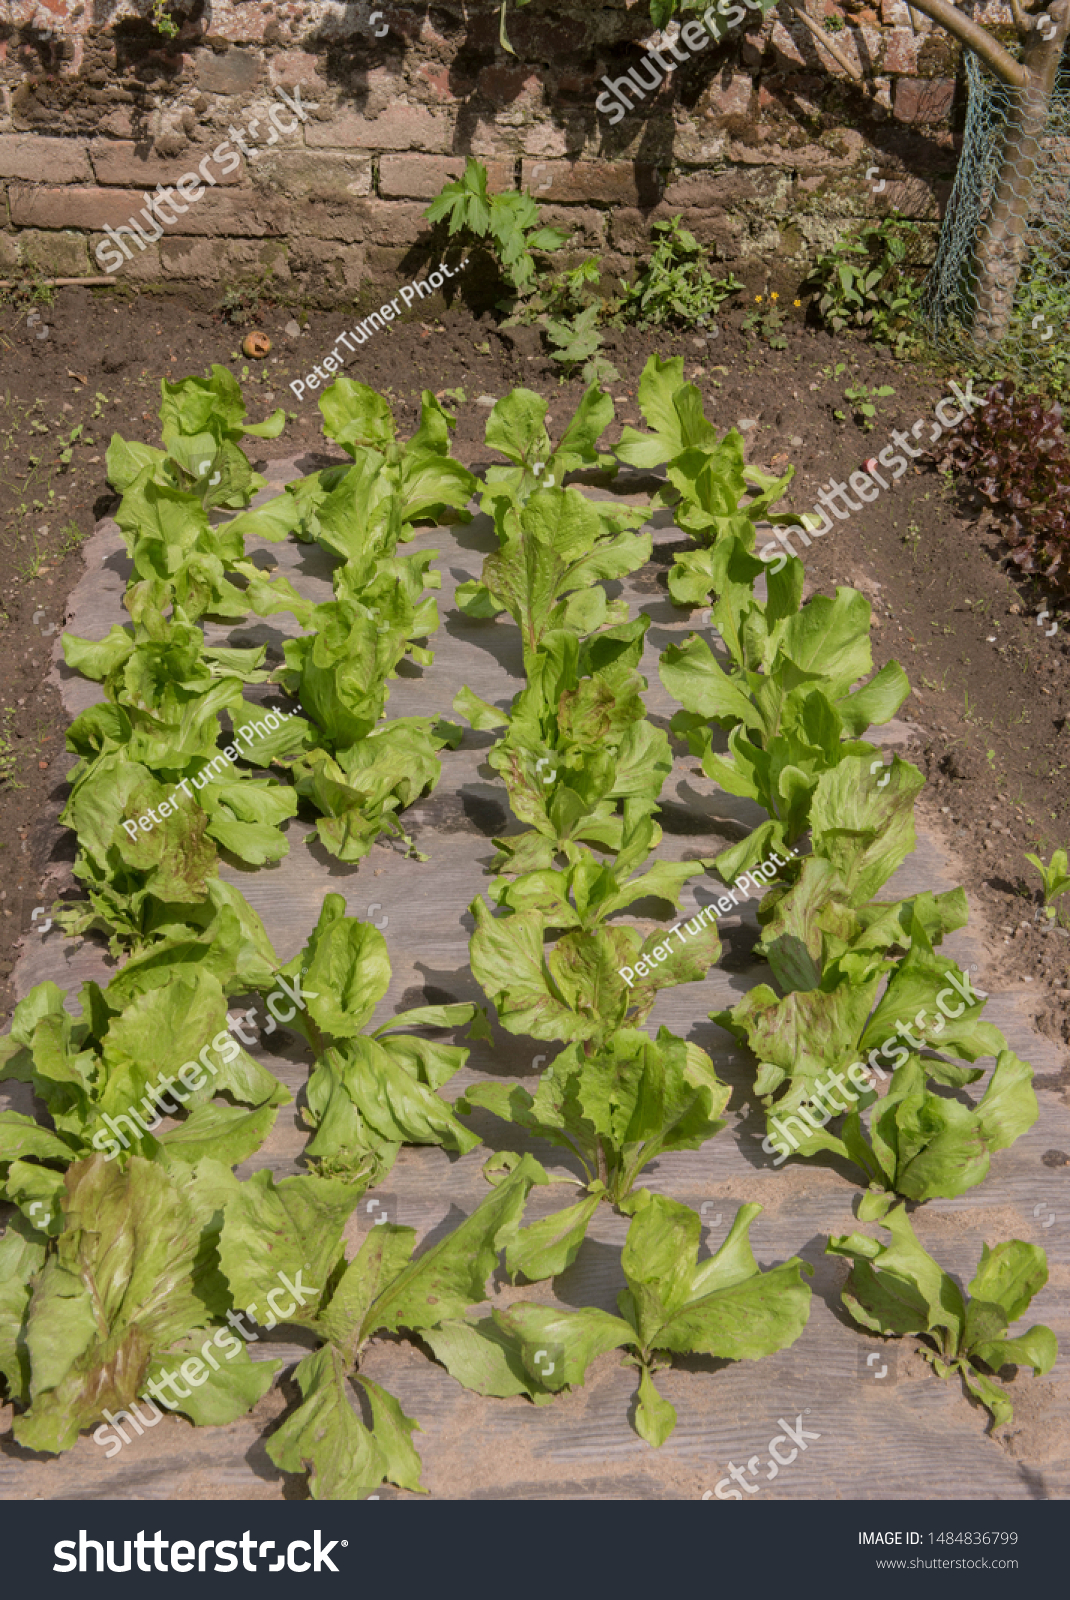 Crop of Home Grown Organic Lettuce (Lactuca sativa) Growing Through Weed Control Fabric on an Allotment in a Walled Vegetable Garden in Rural Cheshire, England, UK #1484836799